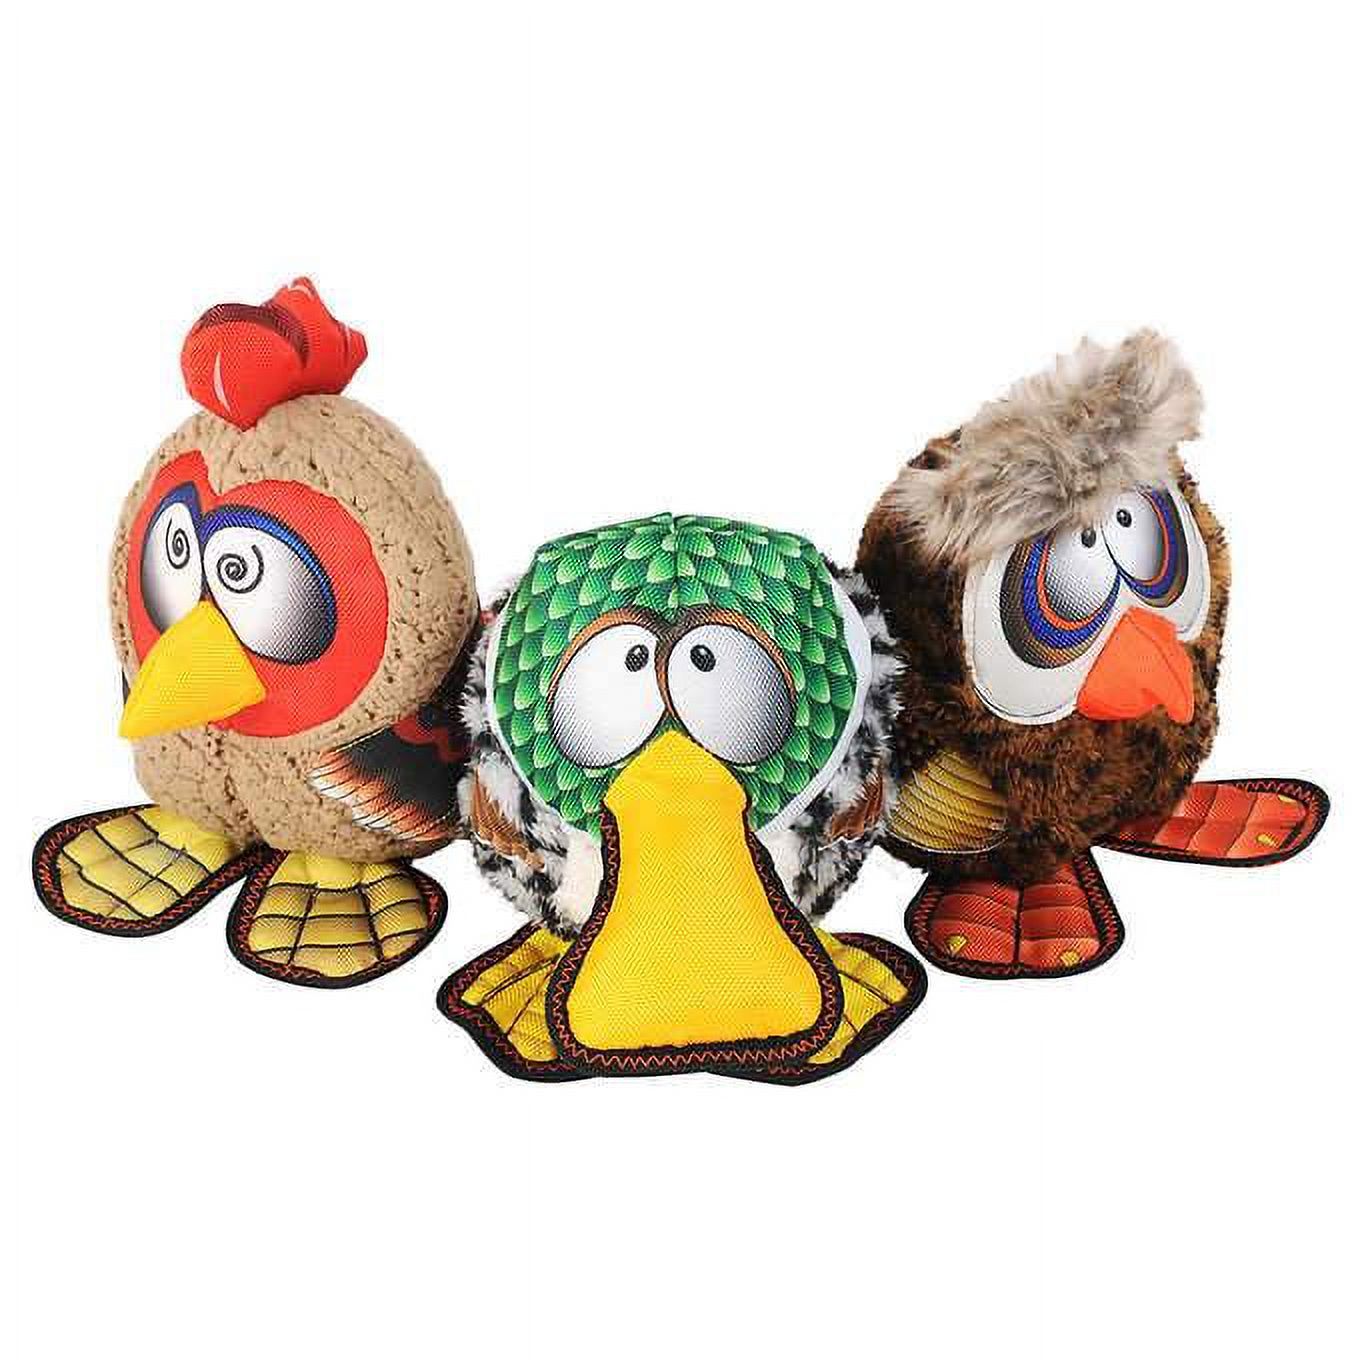 Happy Tails Barnyard Buddy Dog Toys, 3-count - image 1 of 10